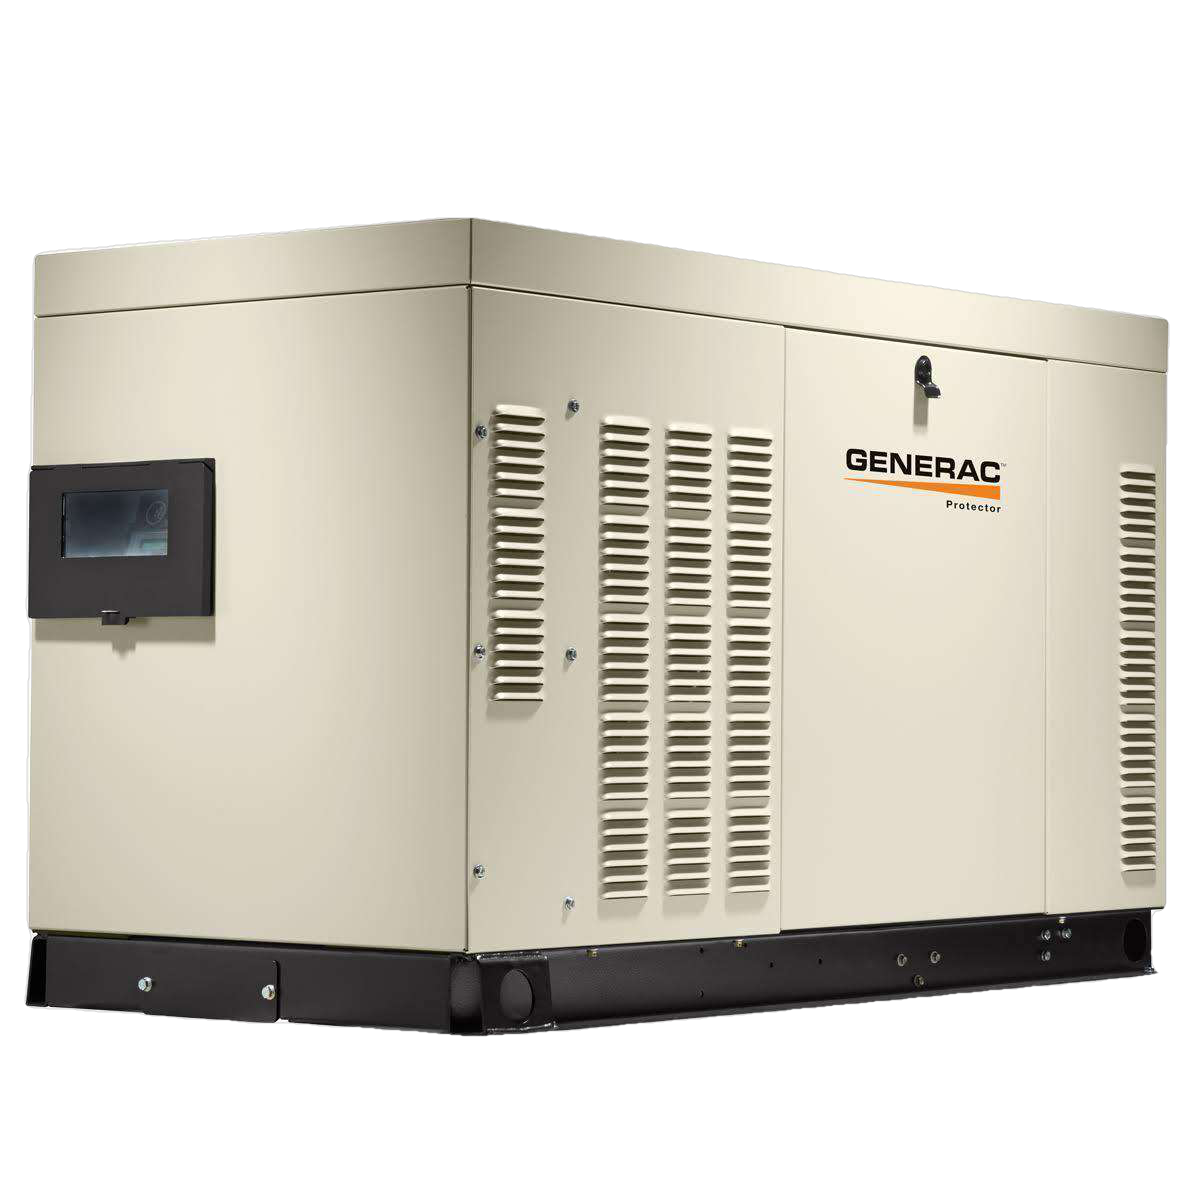 Generac Protector RG03624ANAX 36kW Liquid Cooled 1 Phase Standby Generator Scratch and Dent